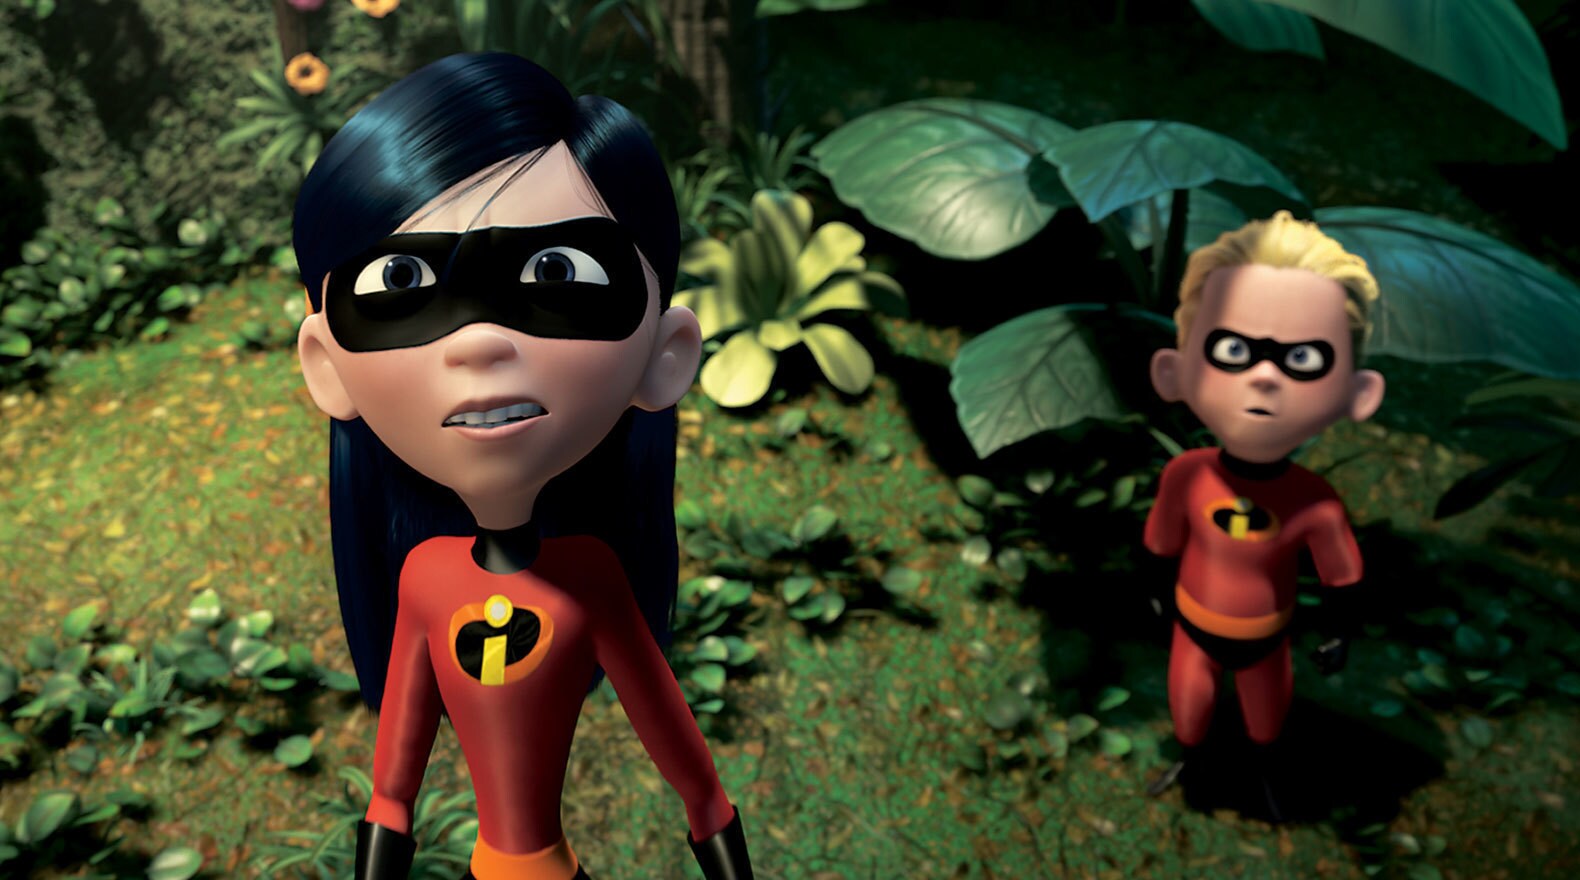 Violet and Dash learn how to work together in "The Incredibles"